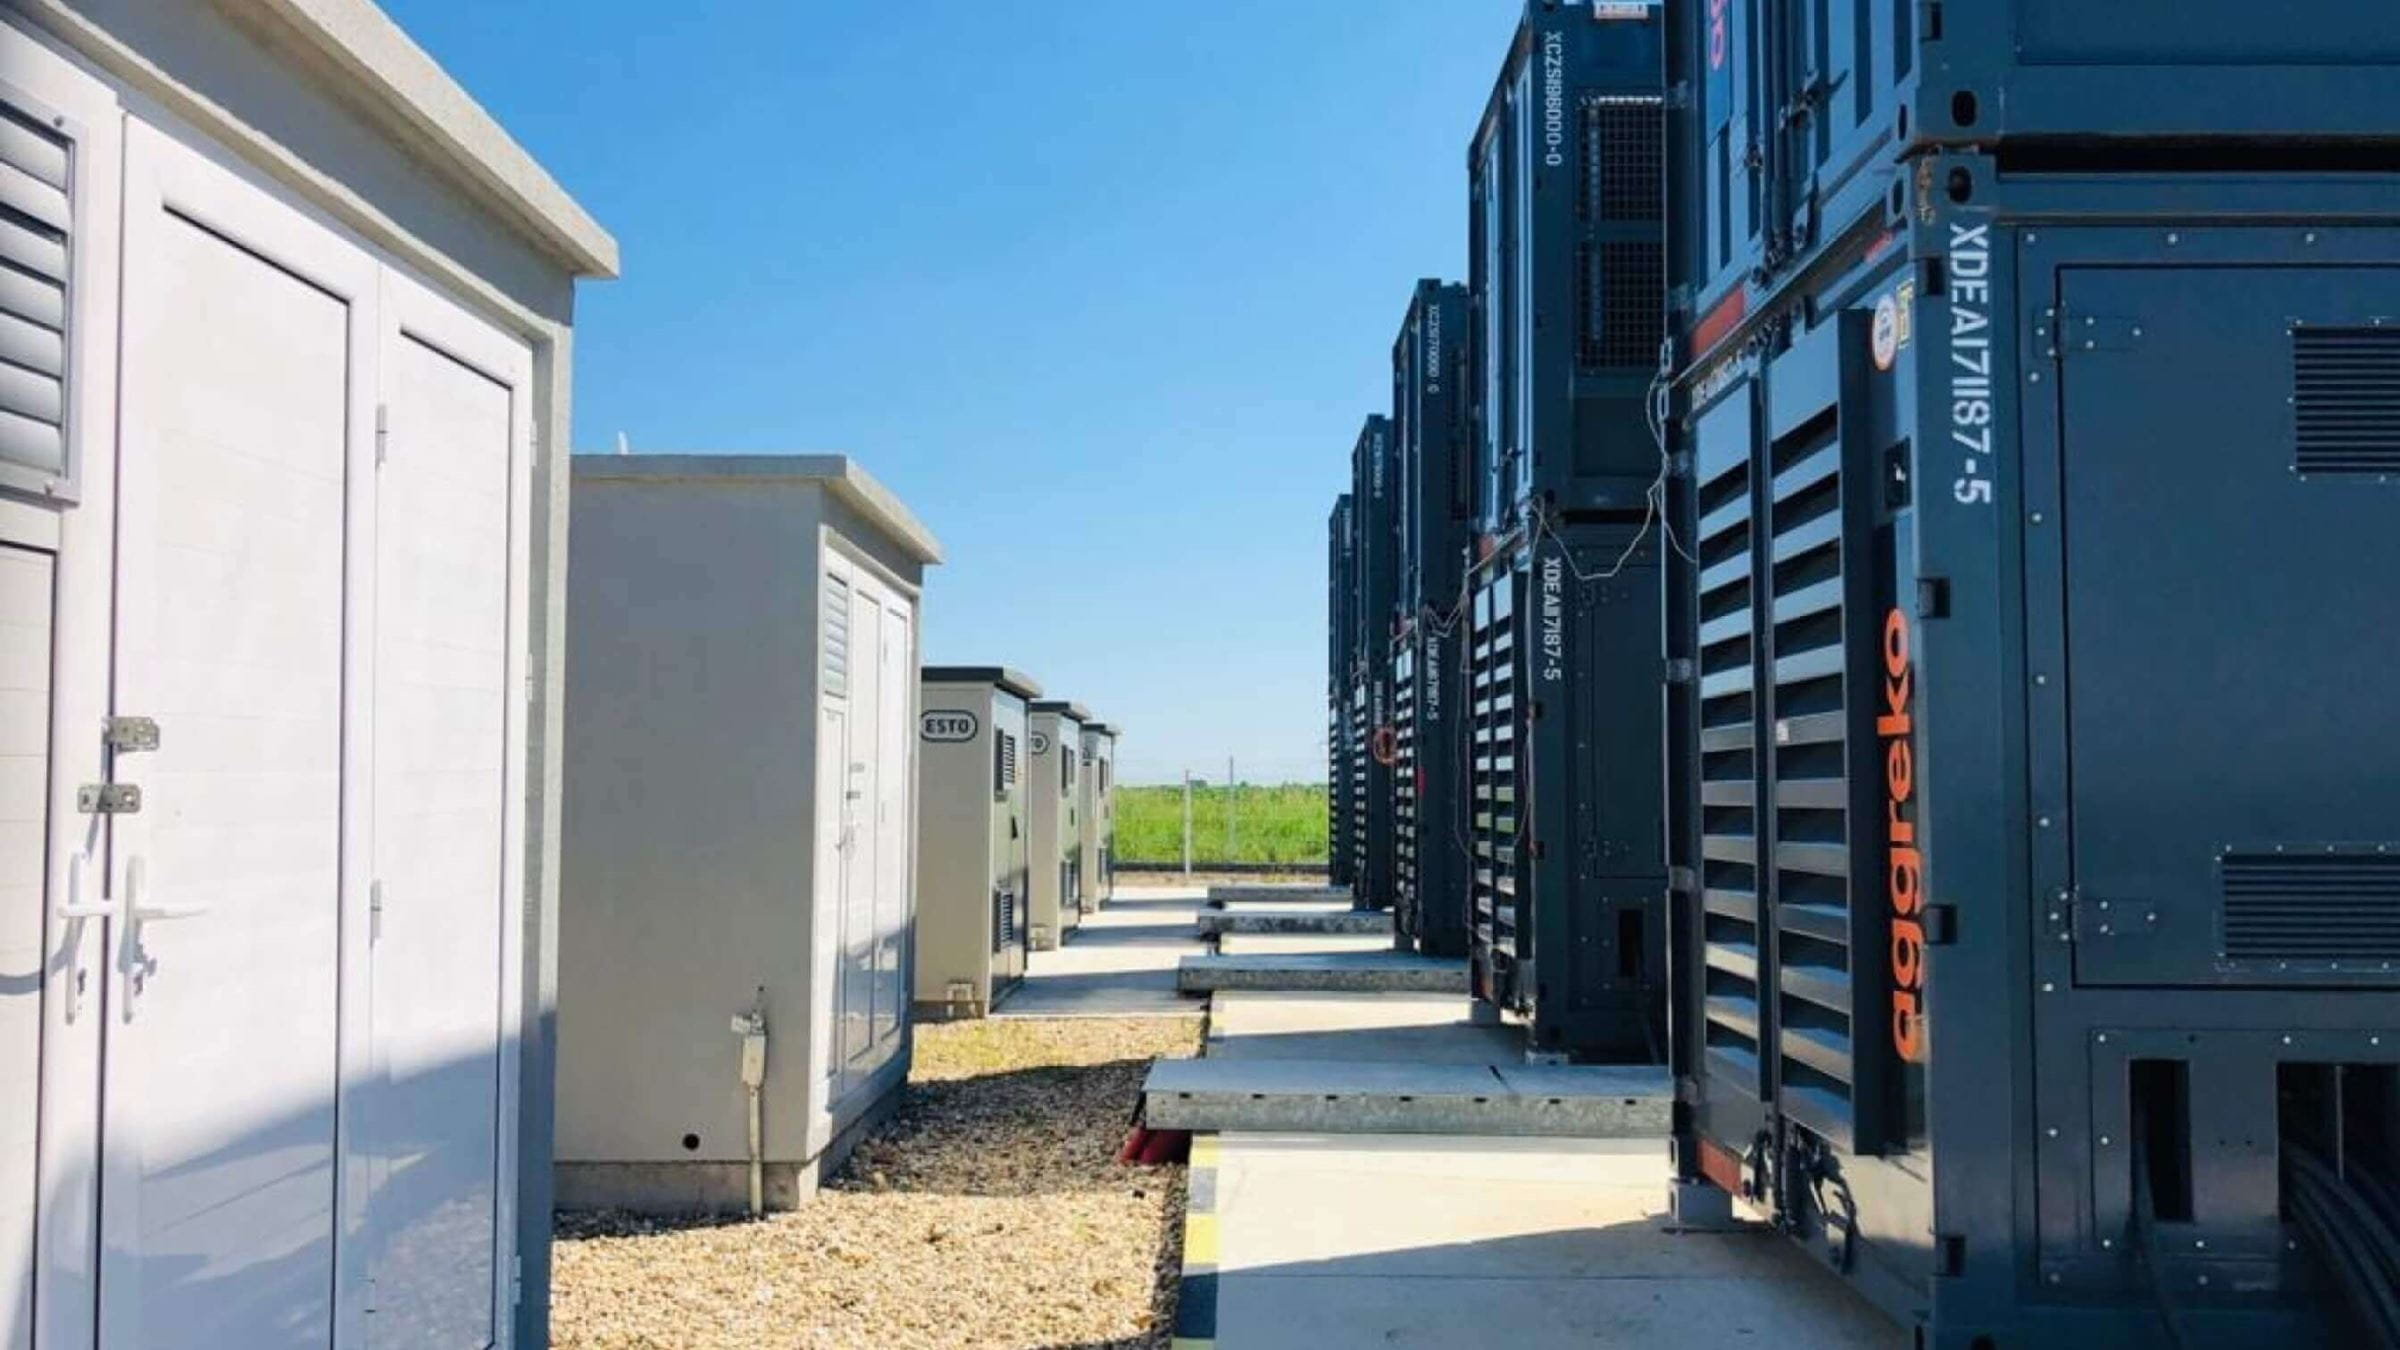 Row of generators with containers outside them 